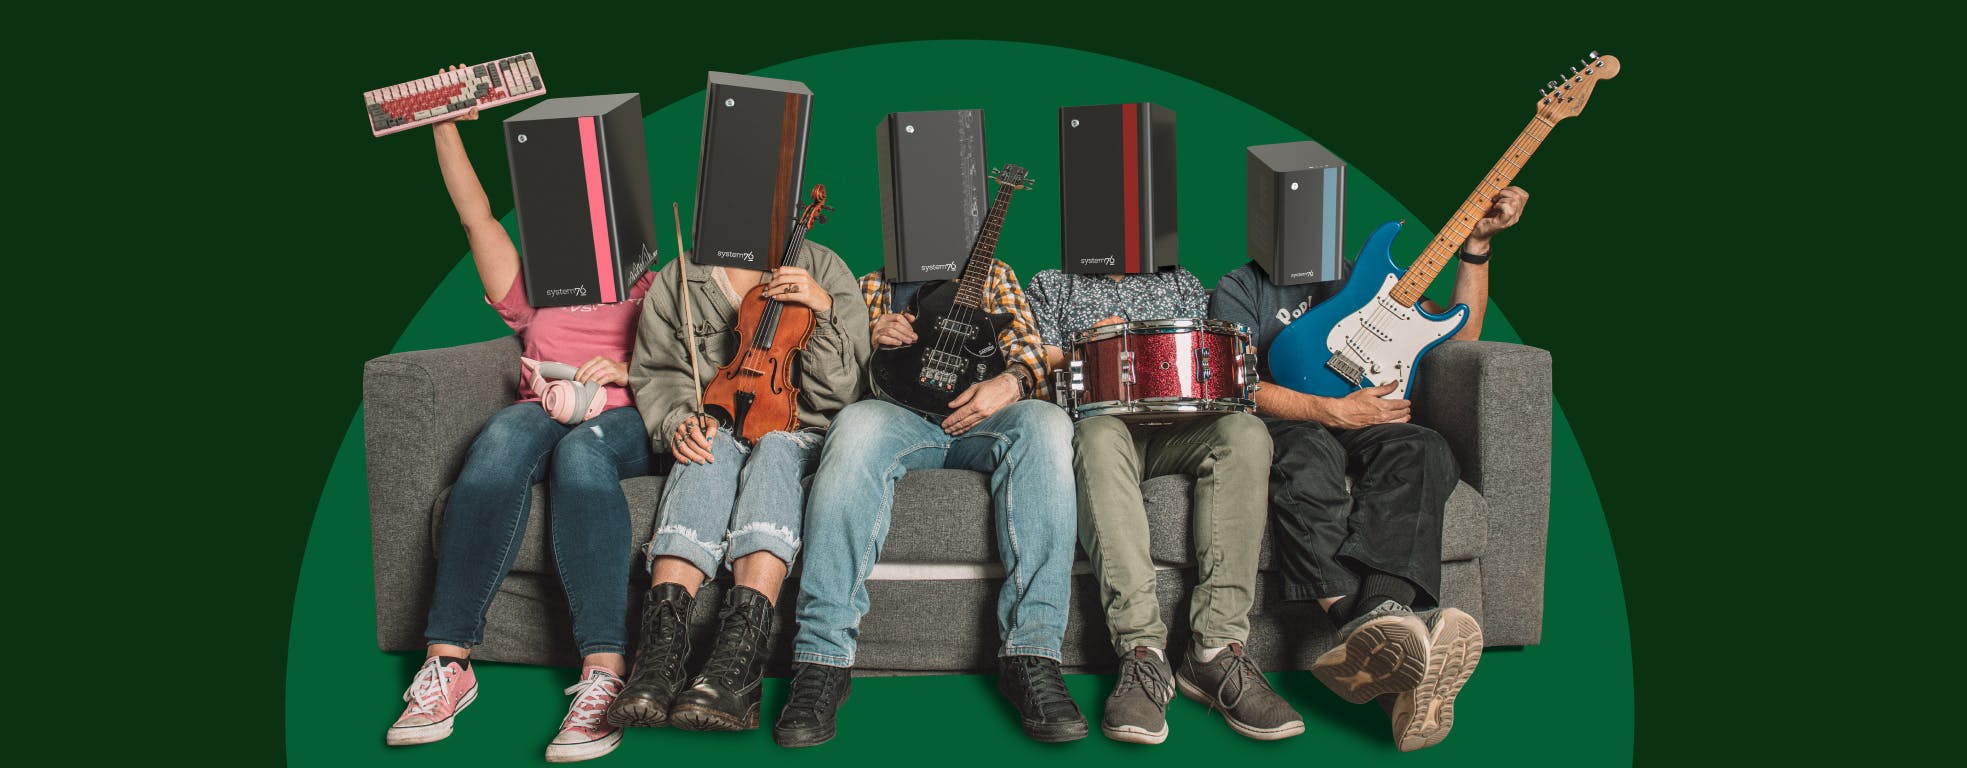 The band members of Theliohead holding instruments and sitting on a grey couch